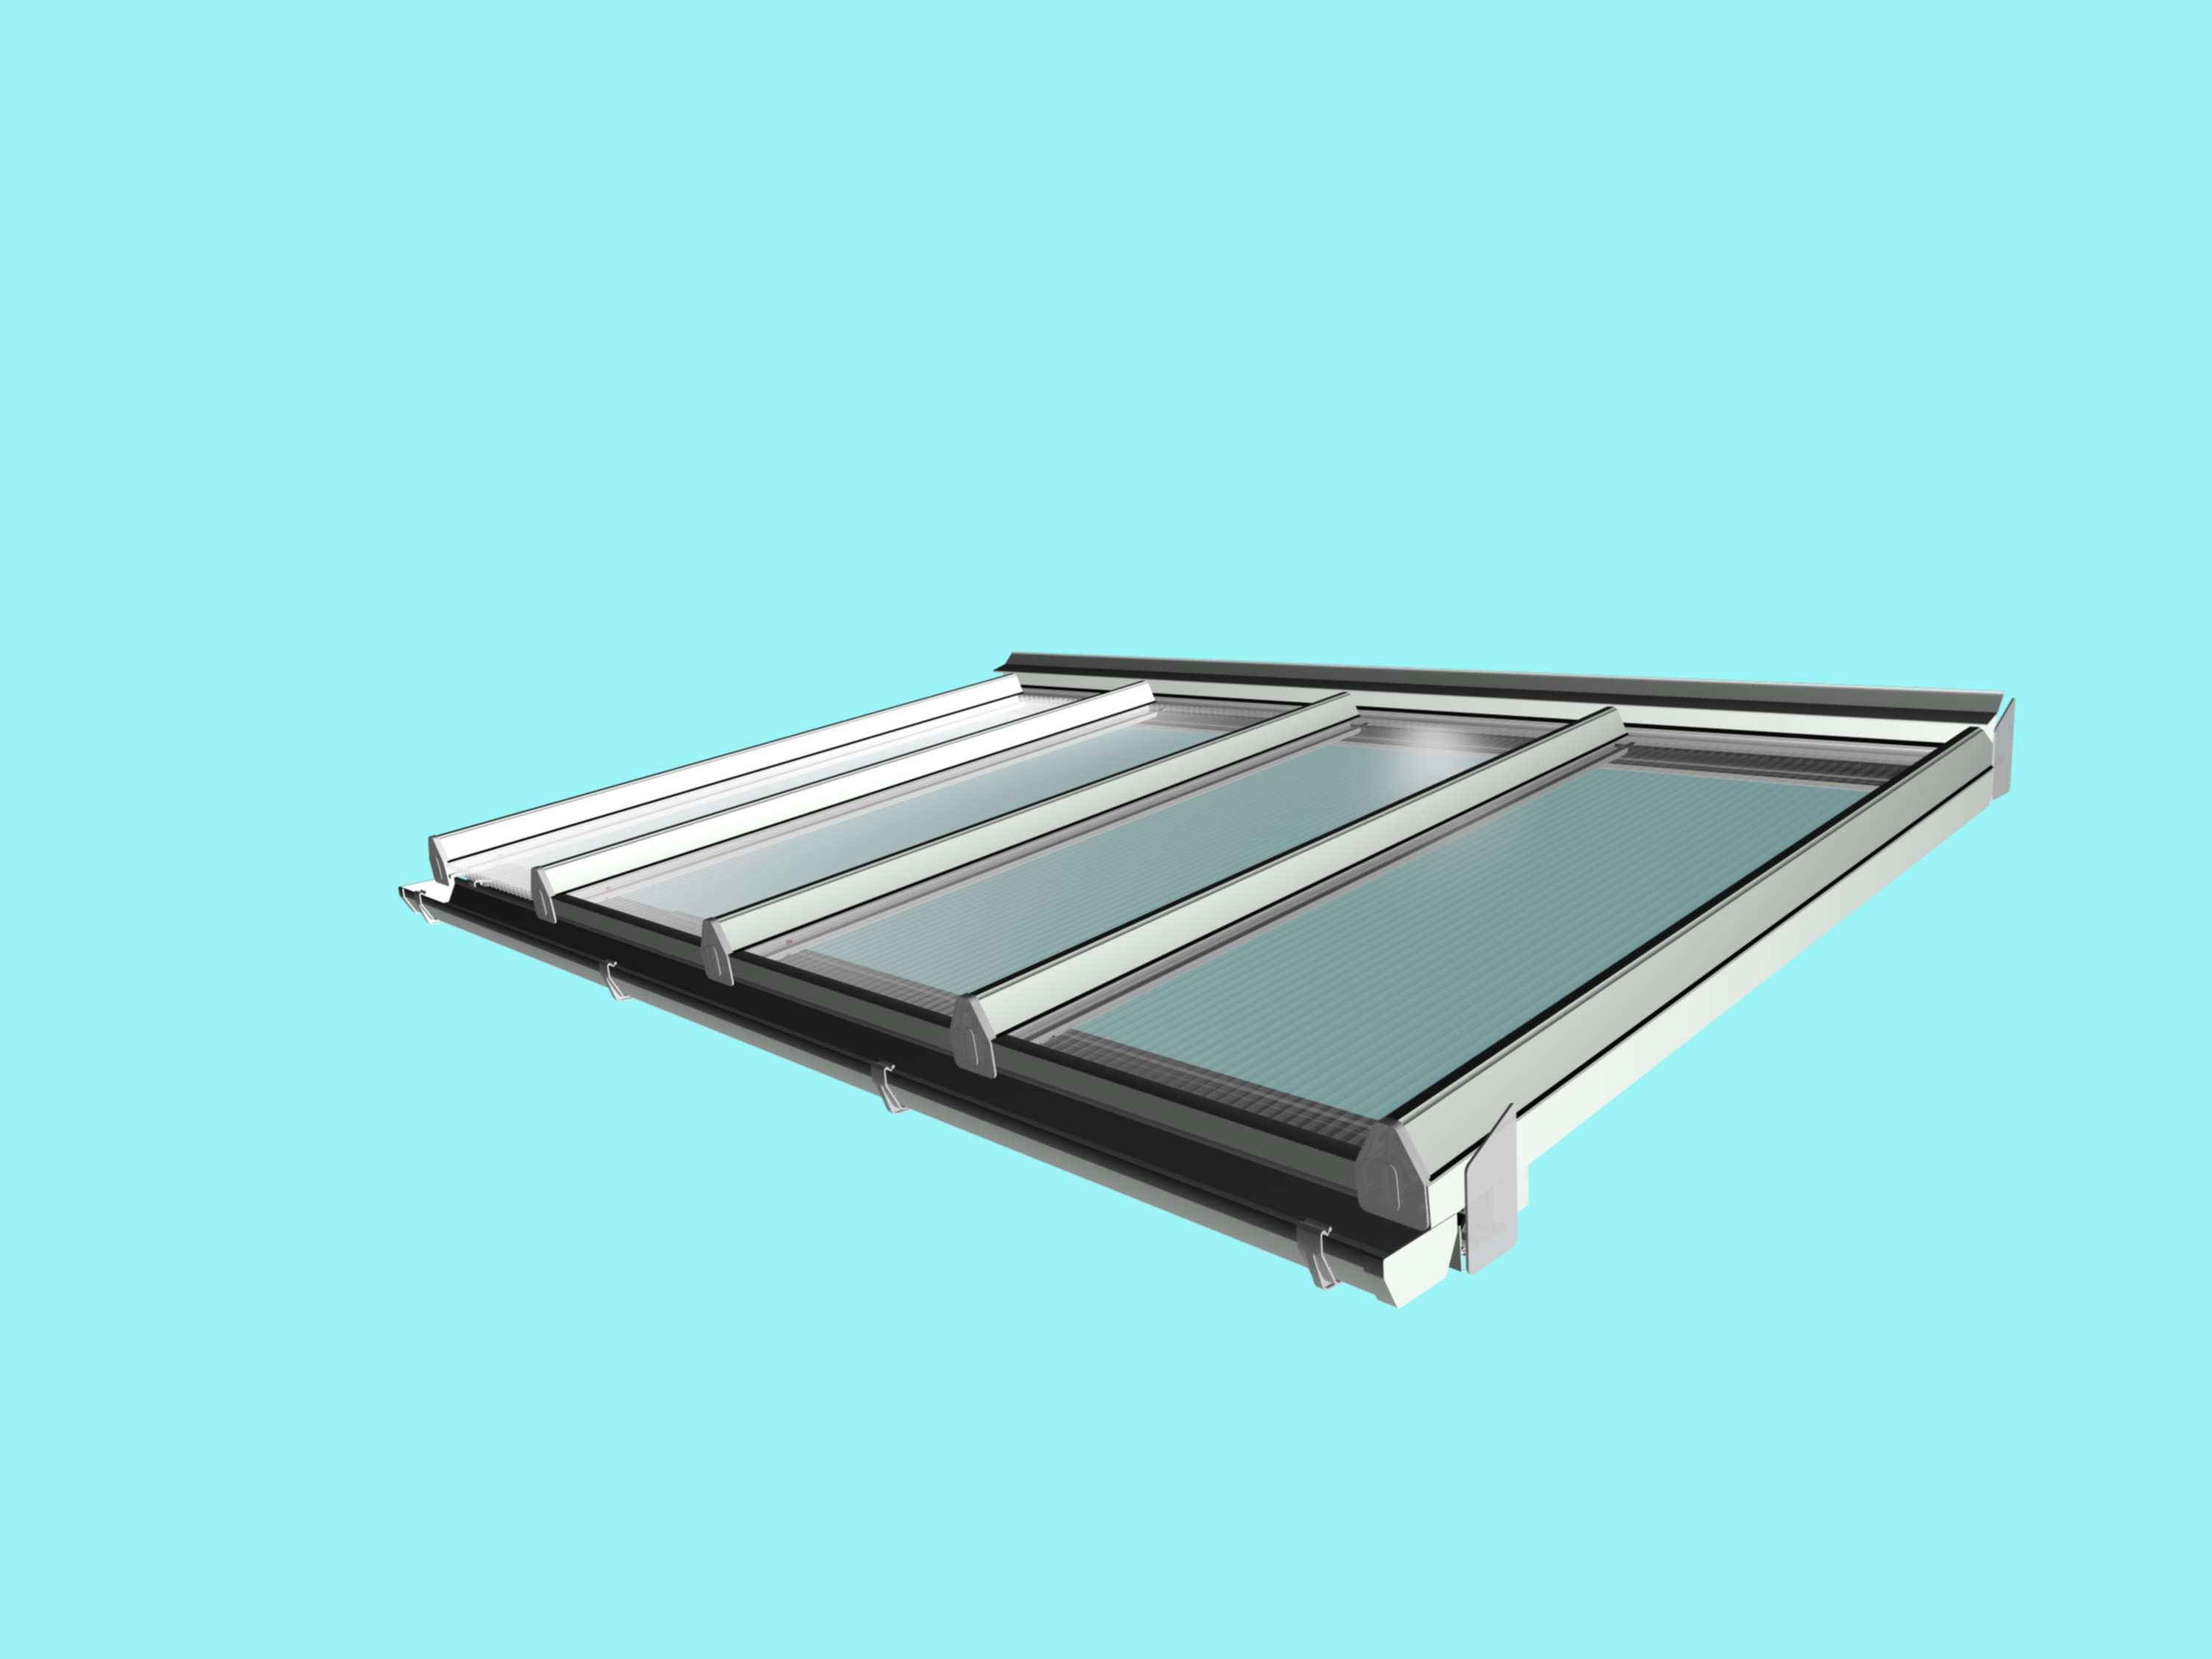 Self-Supporting DIY Conservatory Roof Kit for 25mm polycarbonate, 4.0m wide x 3.0m Projection from Omega Build